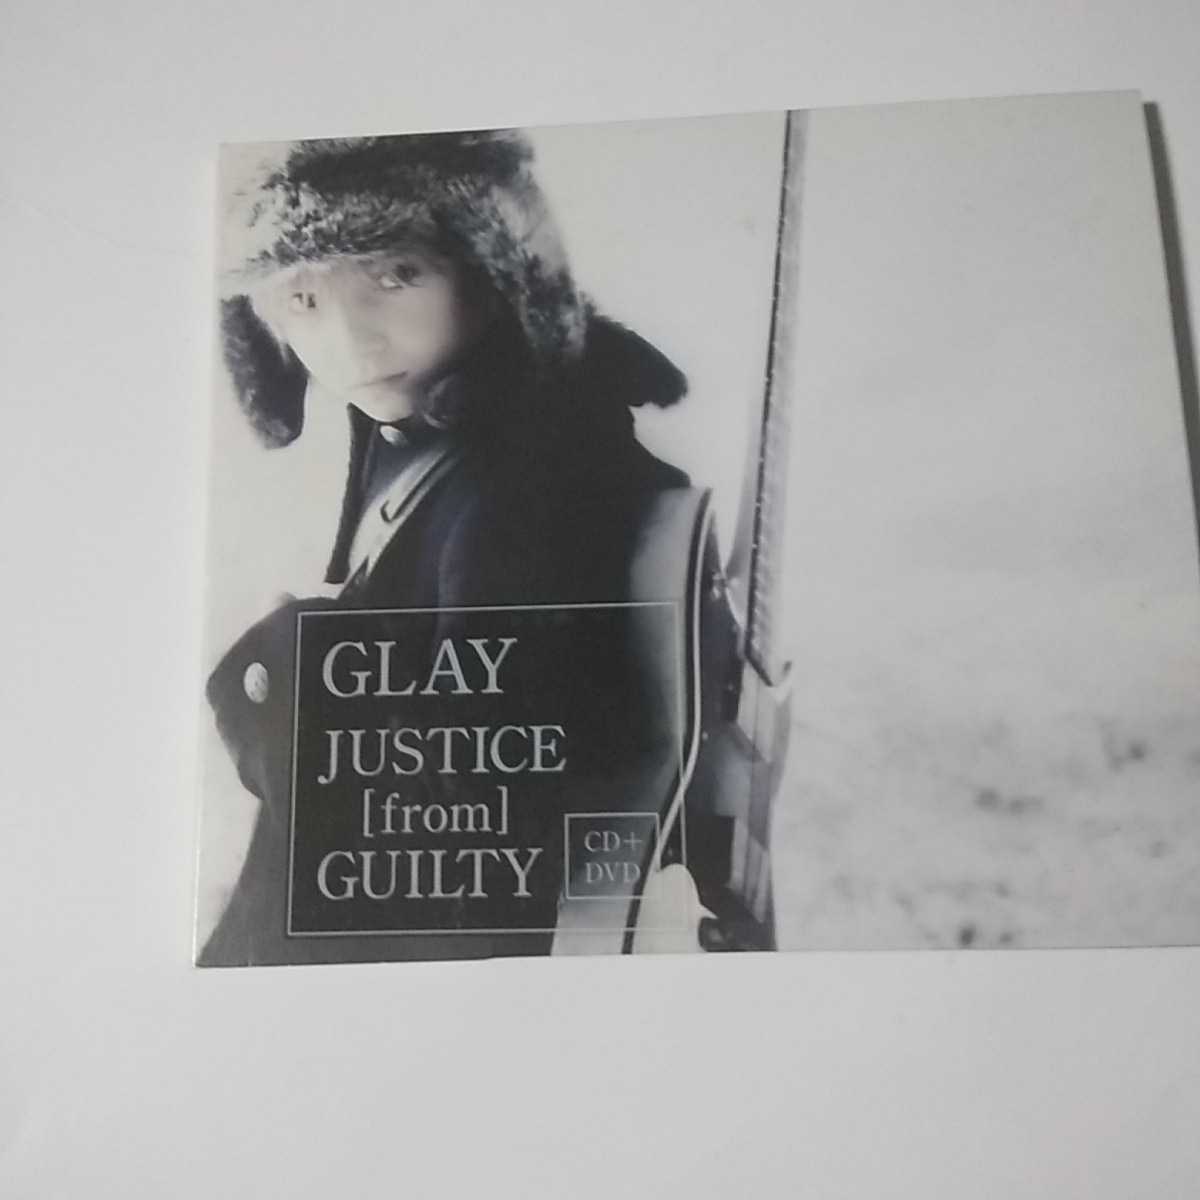 P060 CD+DVD GLAY CD　１．JUSTICE【from】GUILTY　２．MILESTONE～胸いつぱいの憂鬱～　３．Time for Christmas_画像1